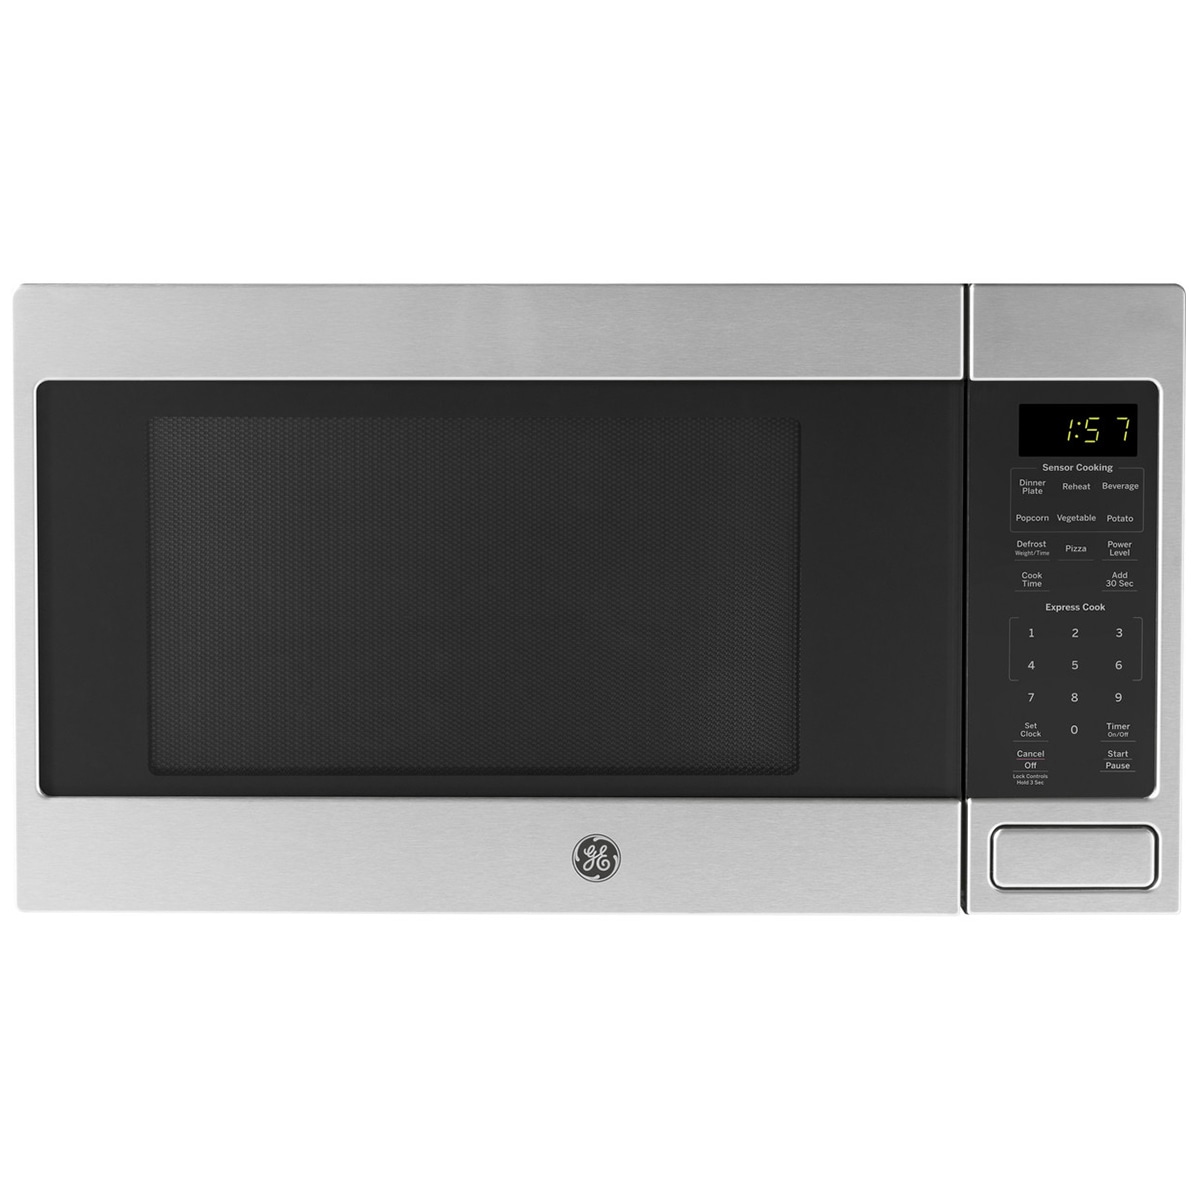 Ge 1 6 Cu Ft Countertop Microwave With Sensor Cooking Stainless